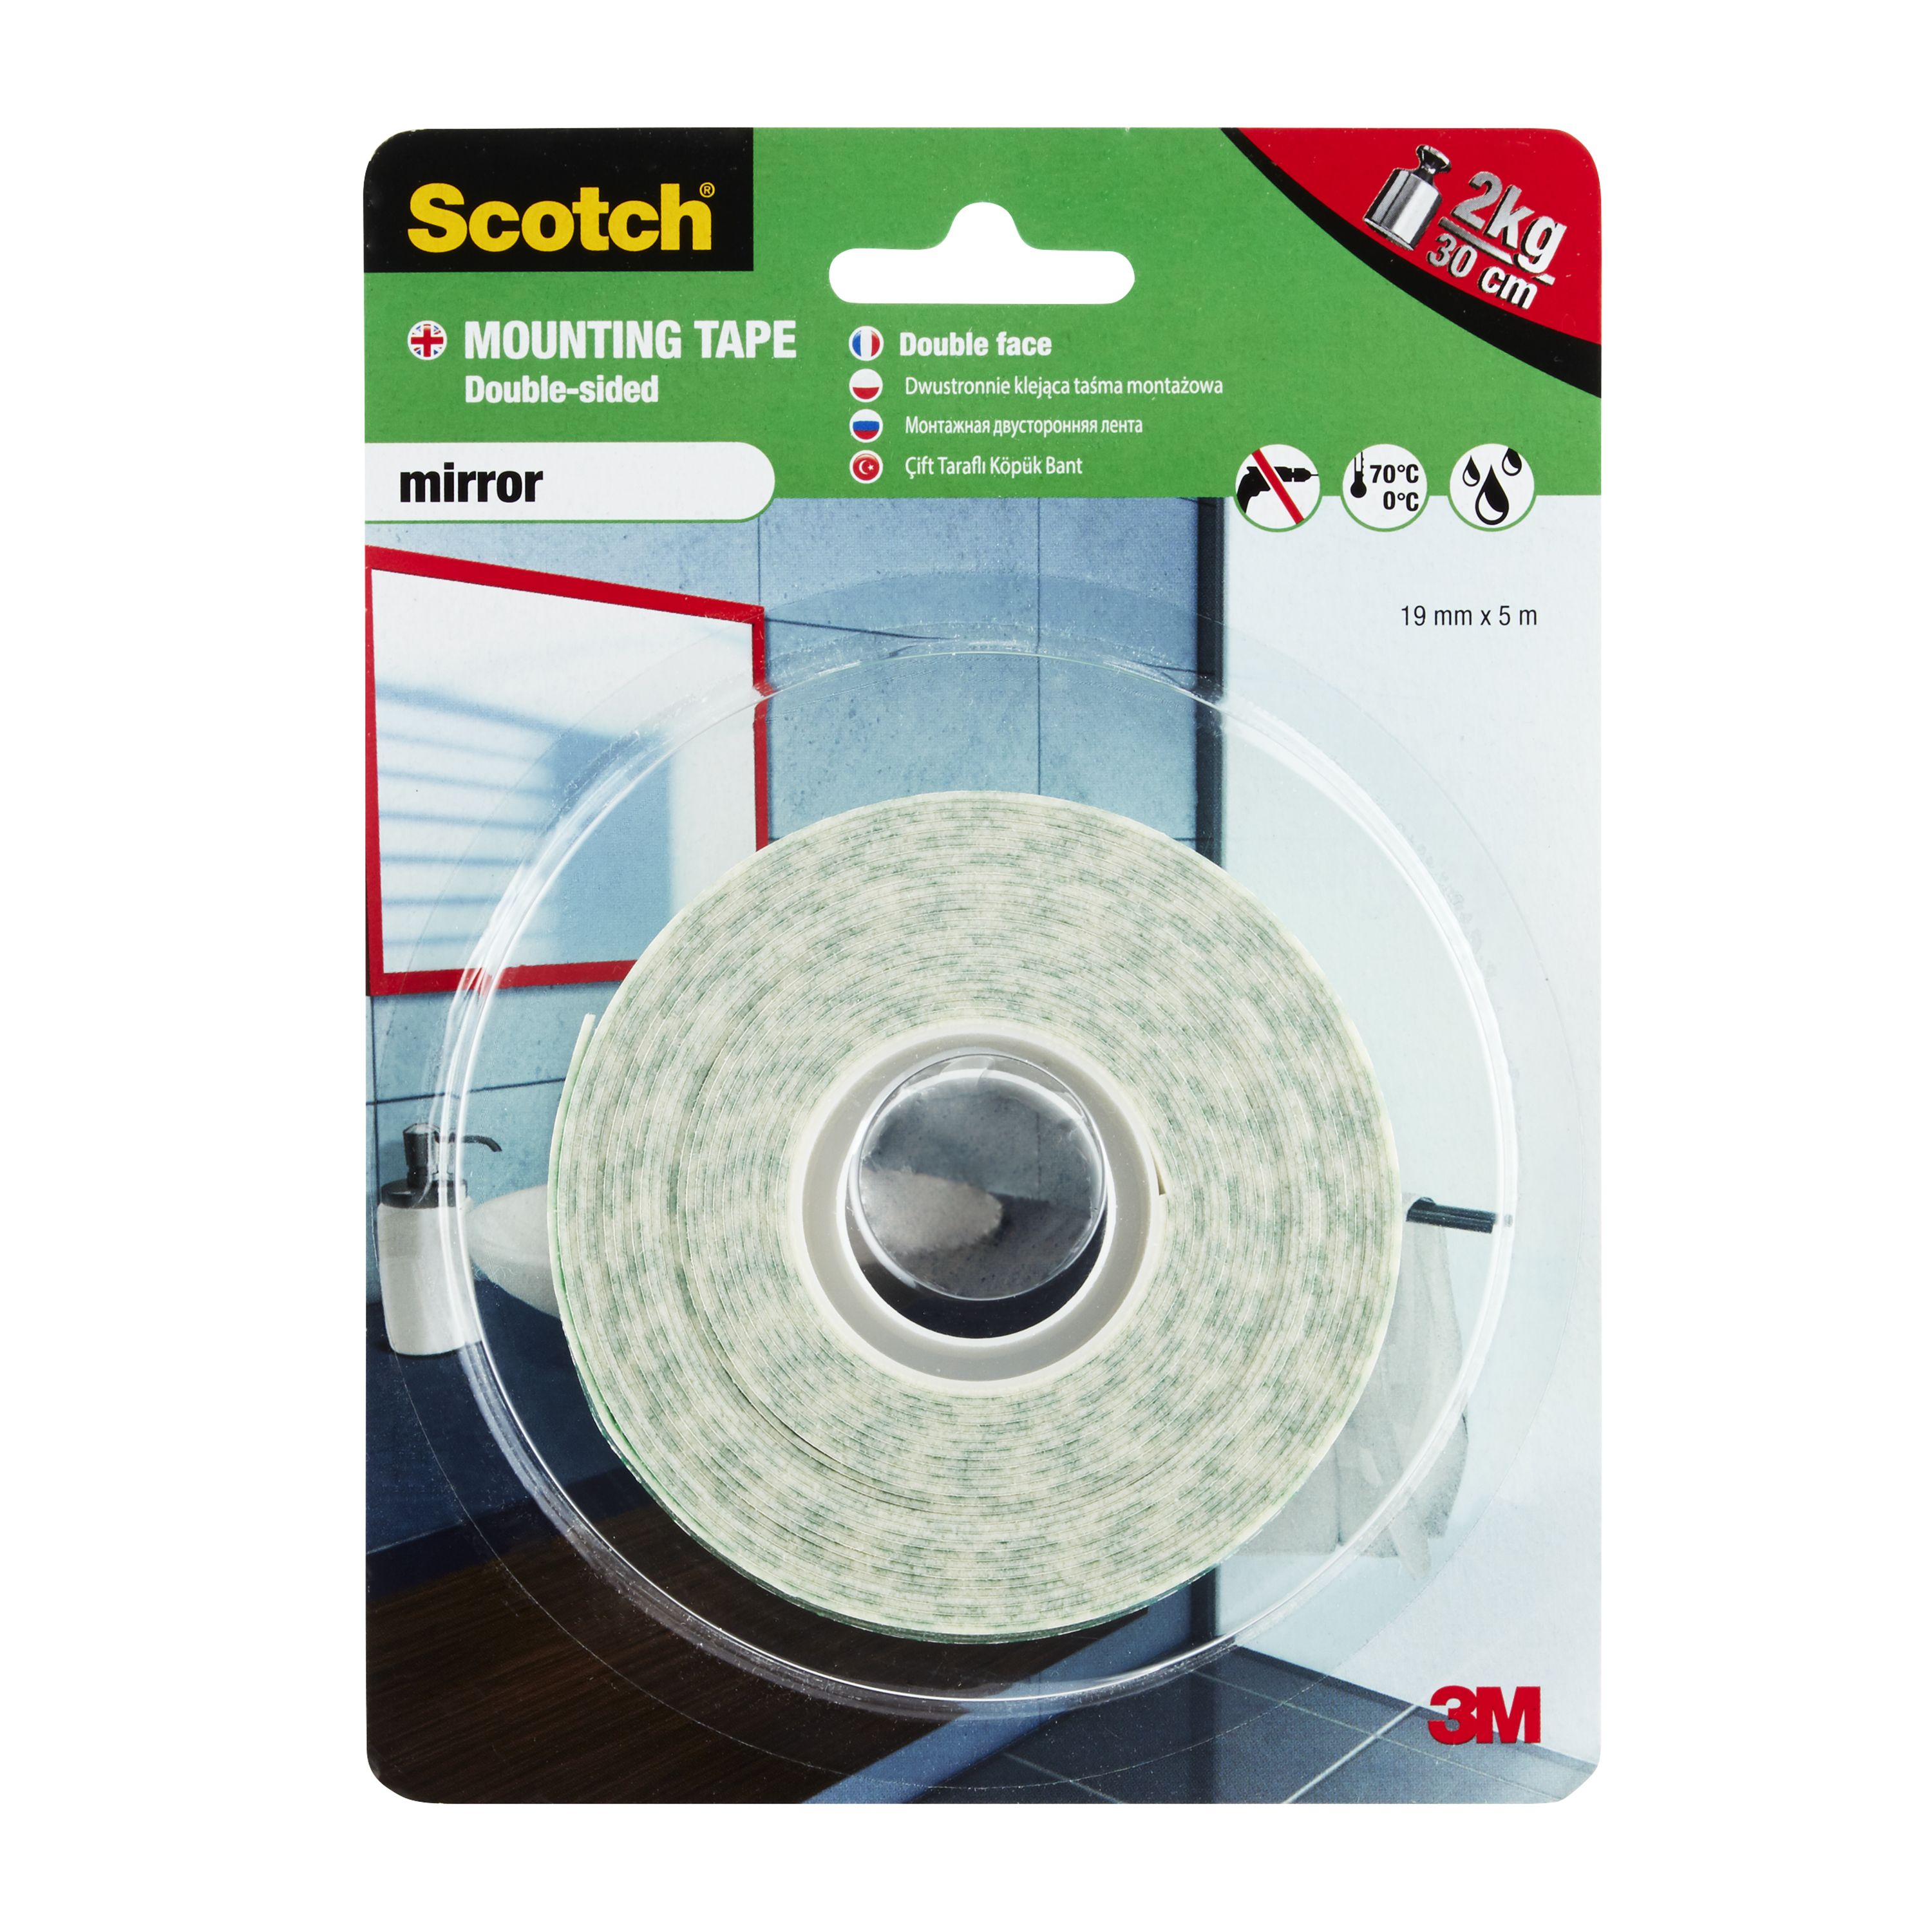 Scotch Double-Coated Foam Mounting Tape - 38 yd Length x 0.75